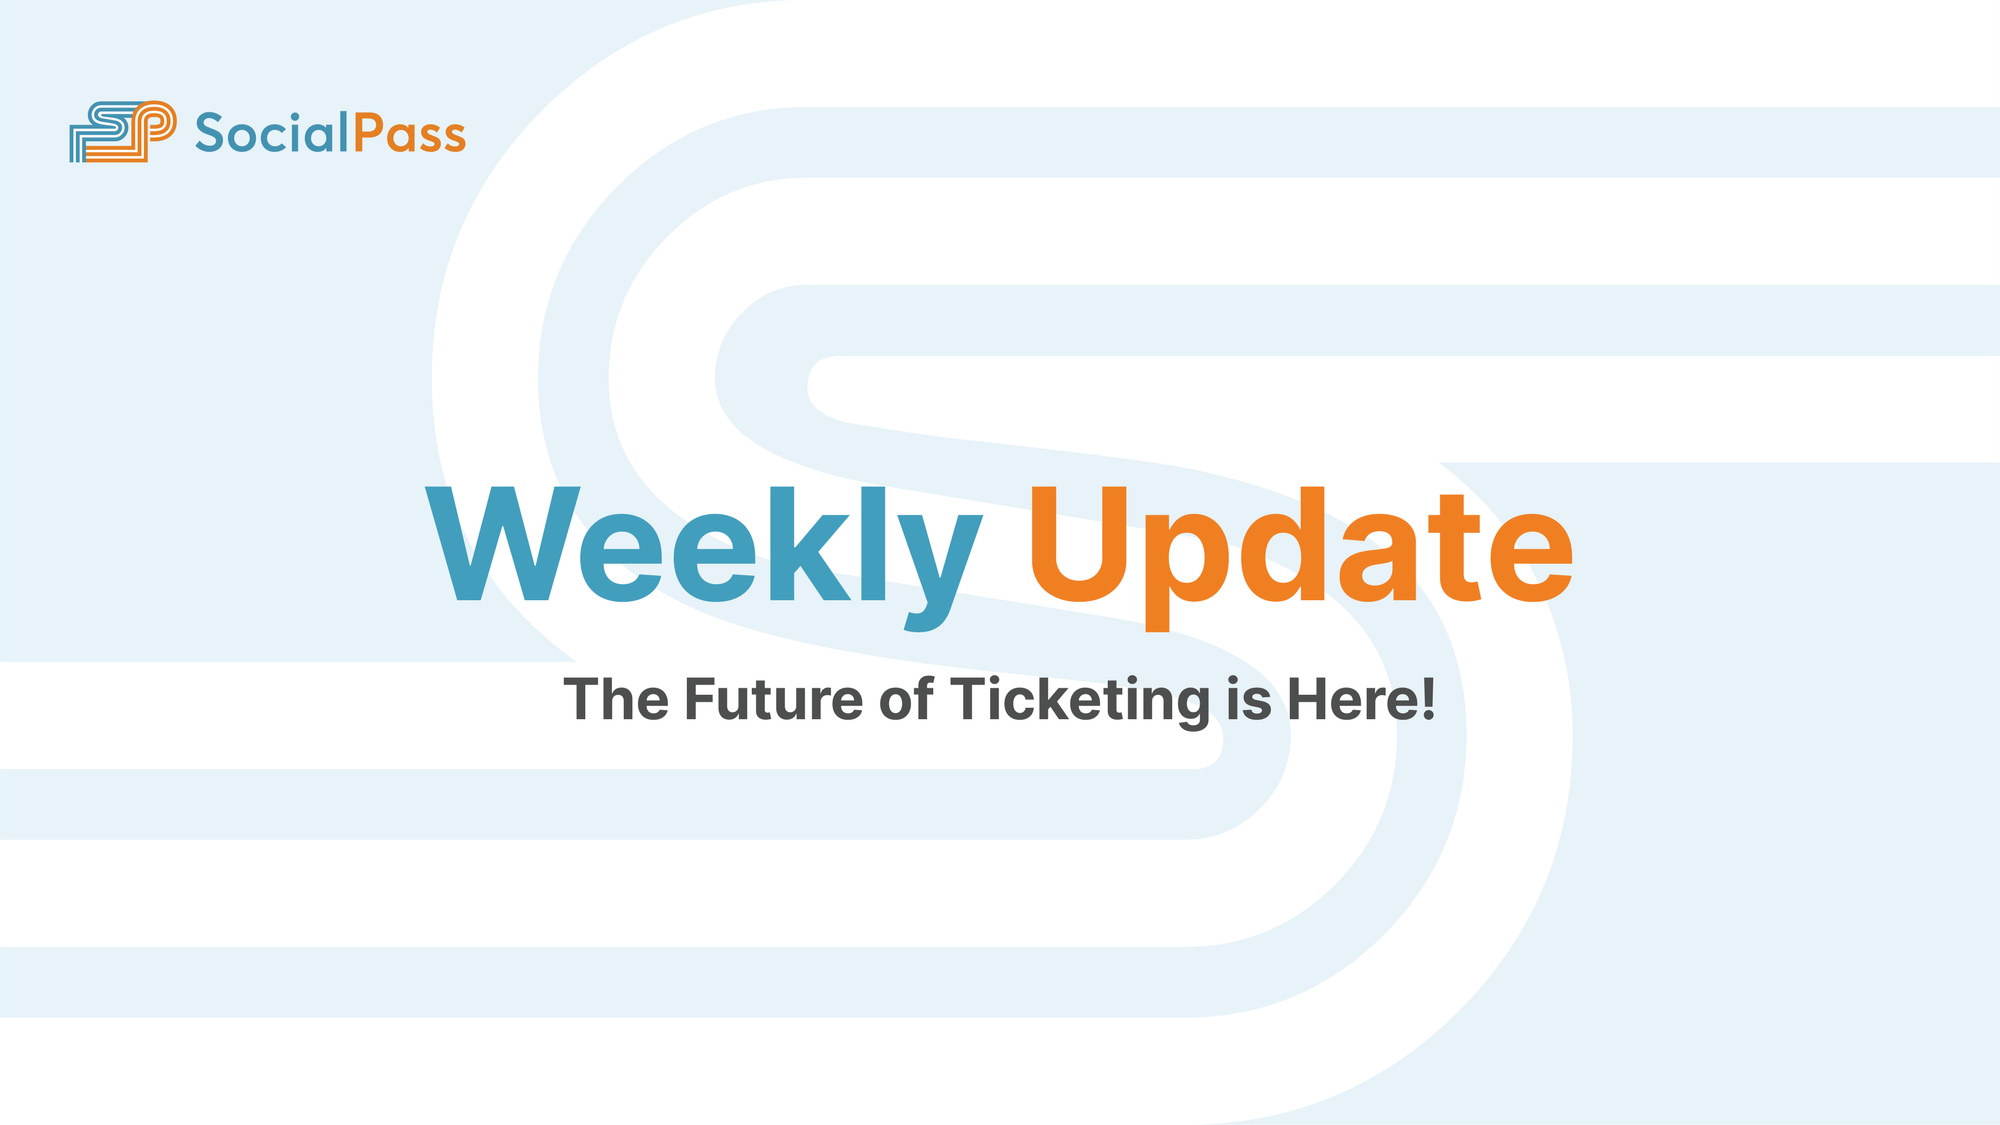 SocialPass Weekly Update: The Future of Ticketing is Here!